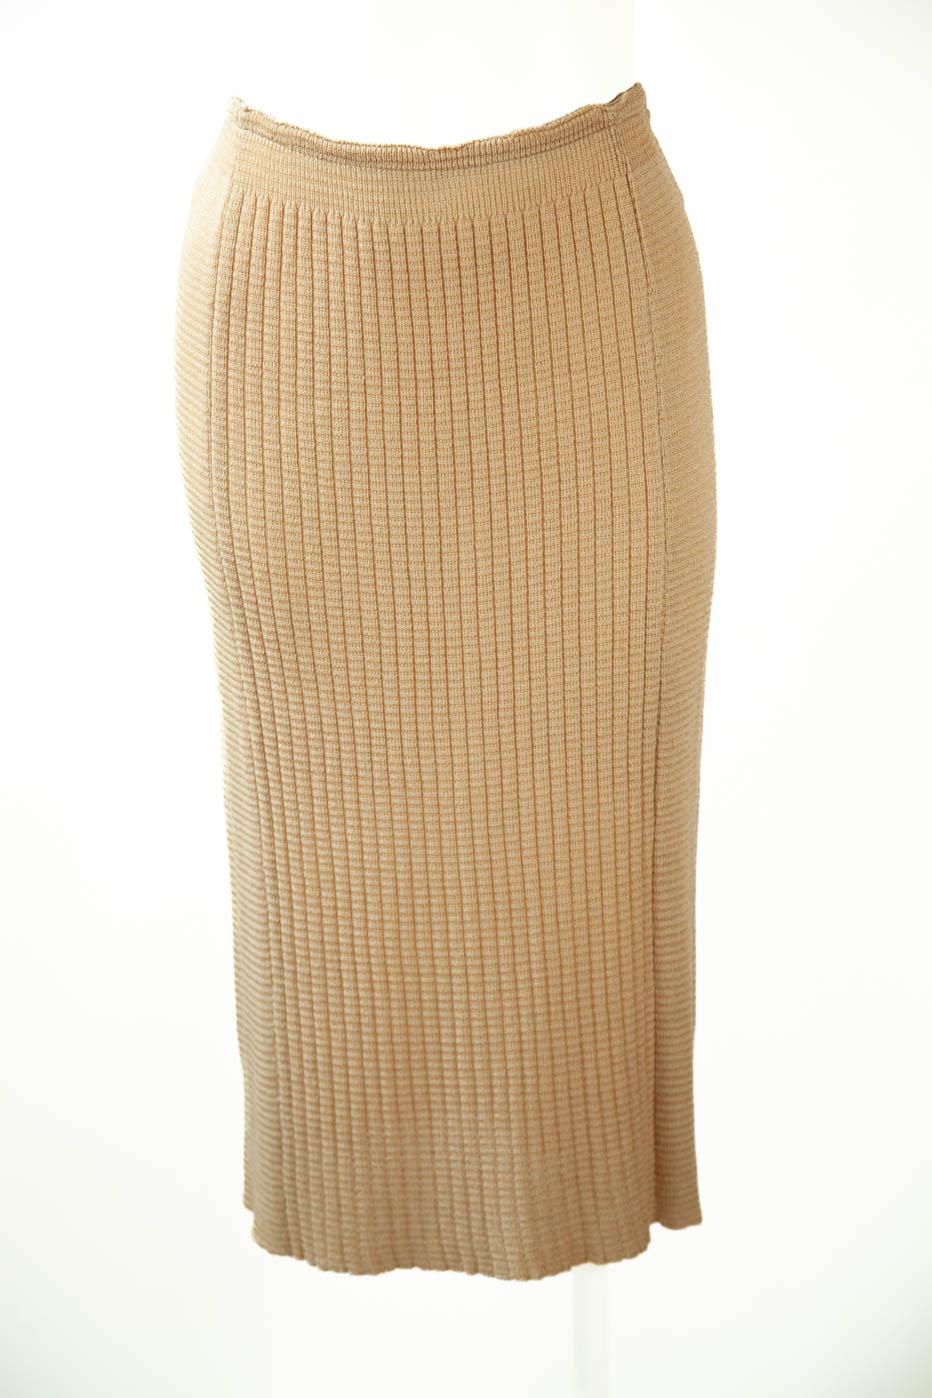 Women's Missoni, Museum Documented Ensemble, Camisole, Skirt and Cardigan, 1973 For Sale